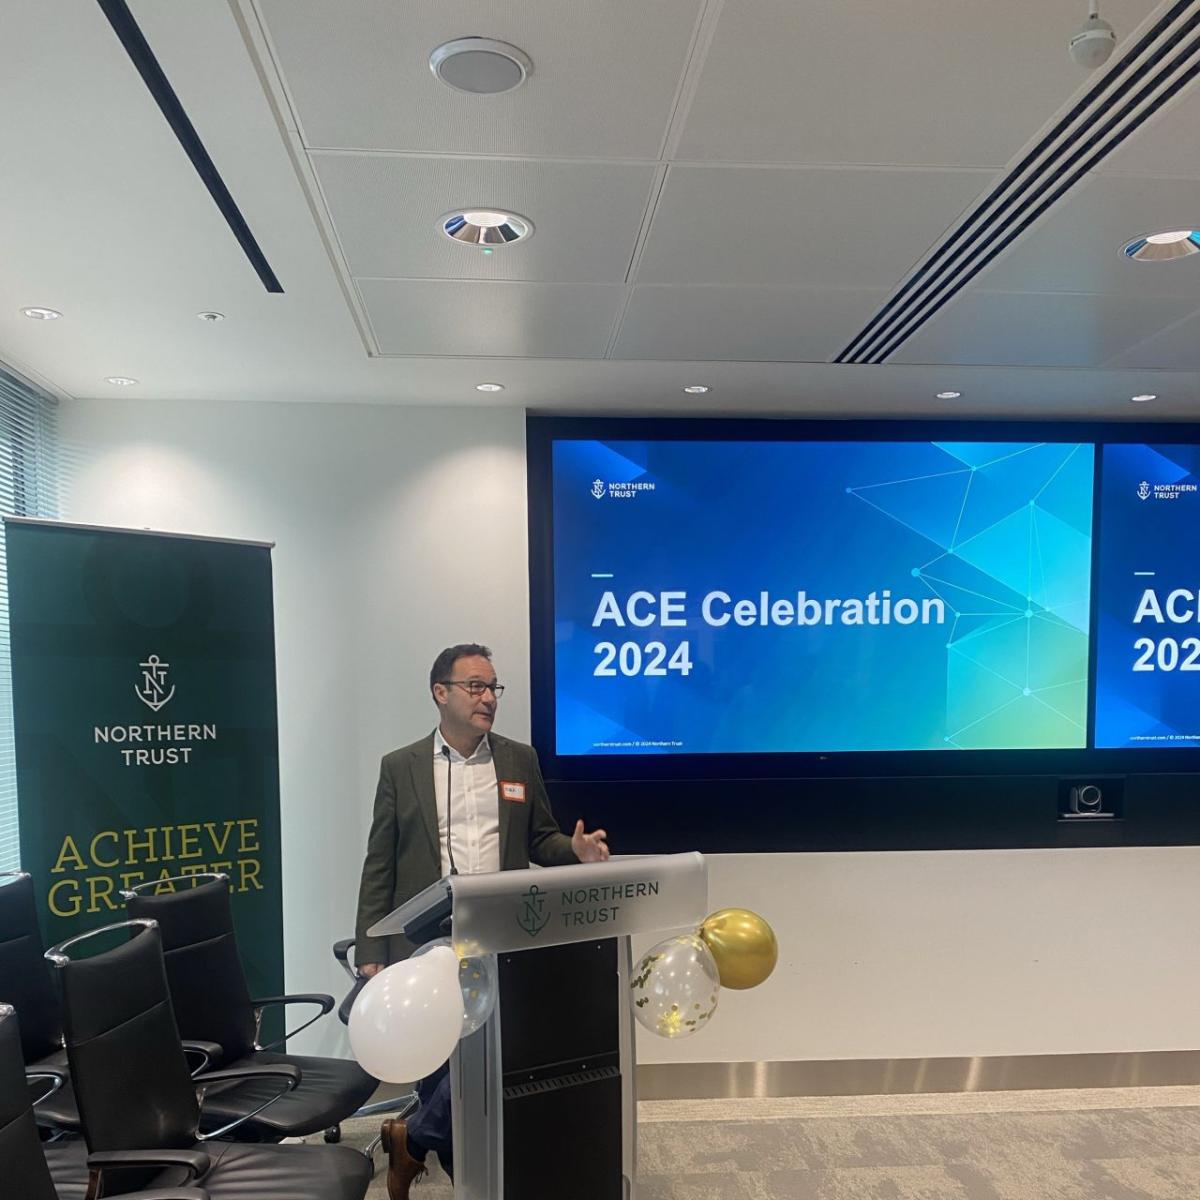 A person speaking at the ACE celebration 2024 event